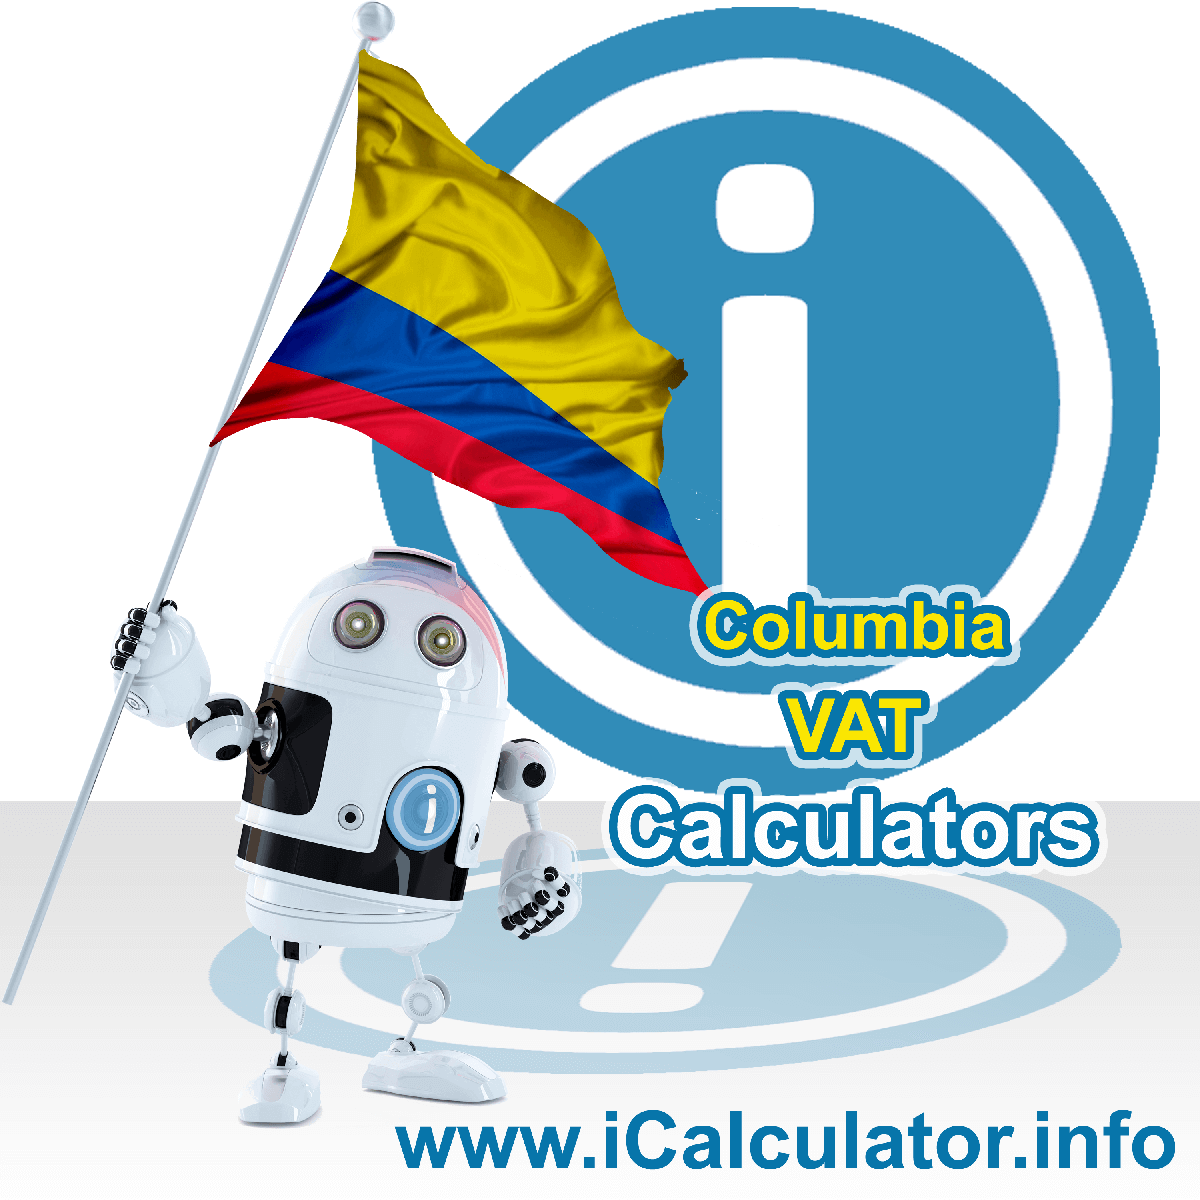 Colombia VAT Calculator. This image shows the Colombia flag and information relating to the VAT formula used for calculating Value Added Tax in Colombia using the Colombia VAT Calculator in 2023